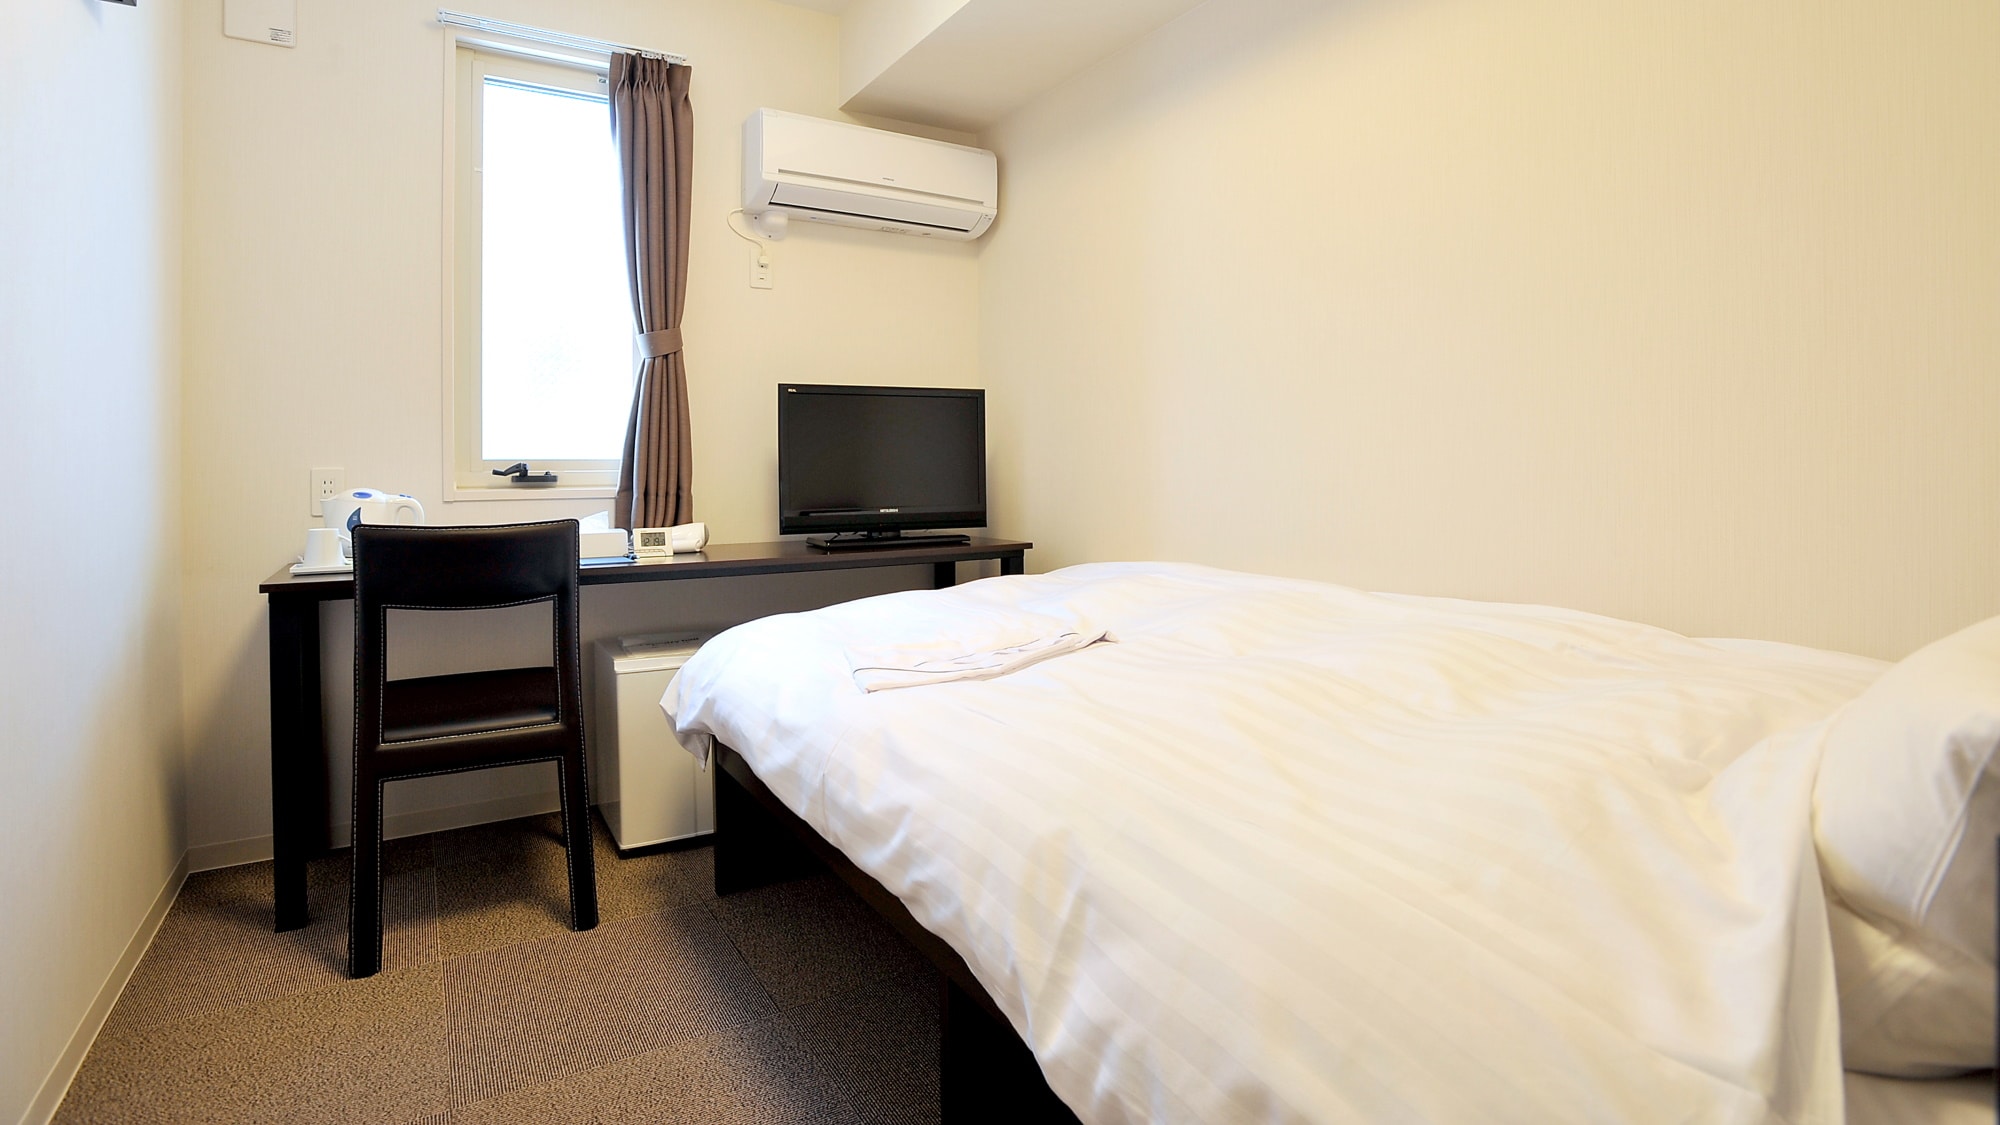 Single room 11.8 sqm, bed width 110 cm, individual air conditioning, Wi-Fi